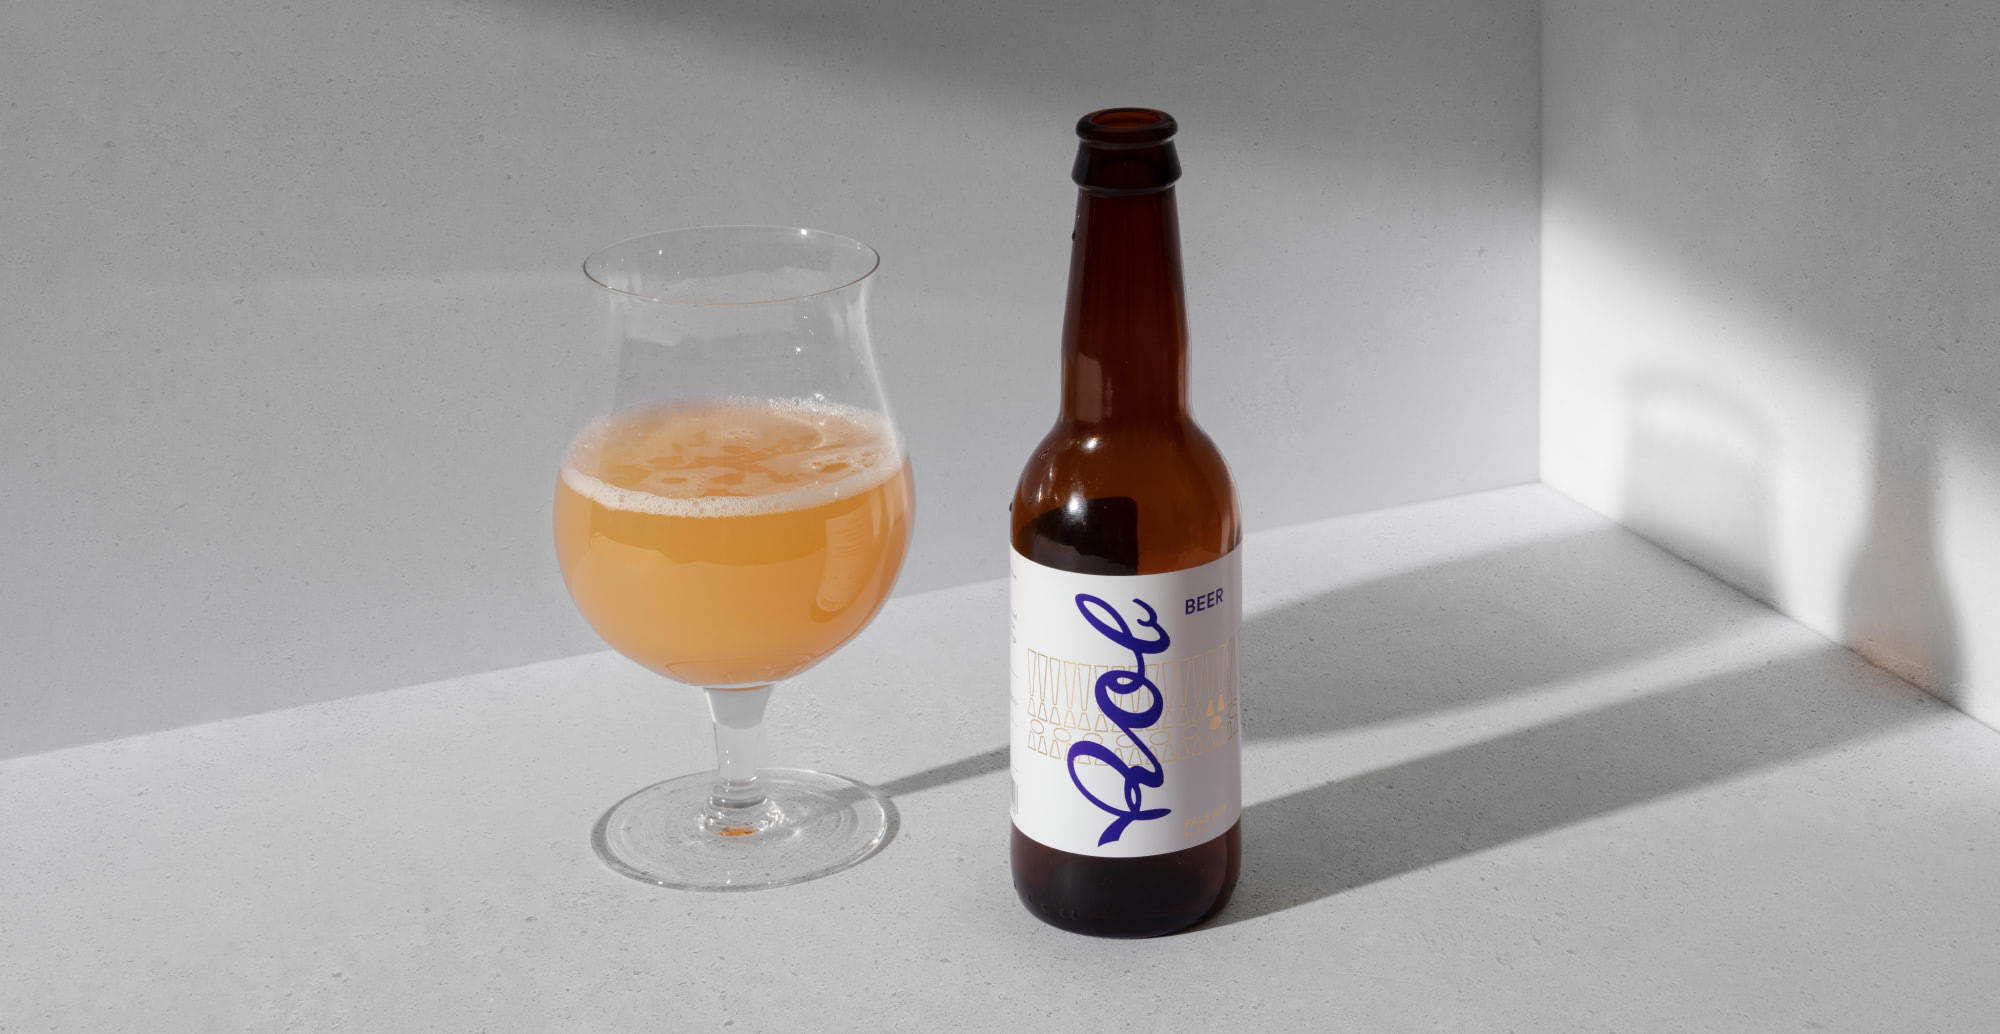 Case: Rob Beer